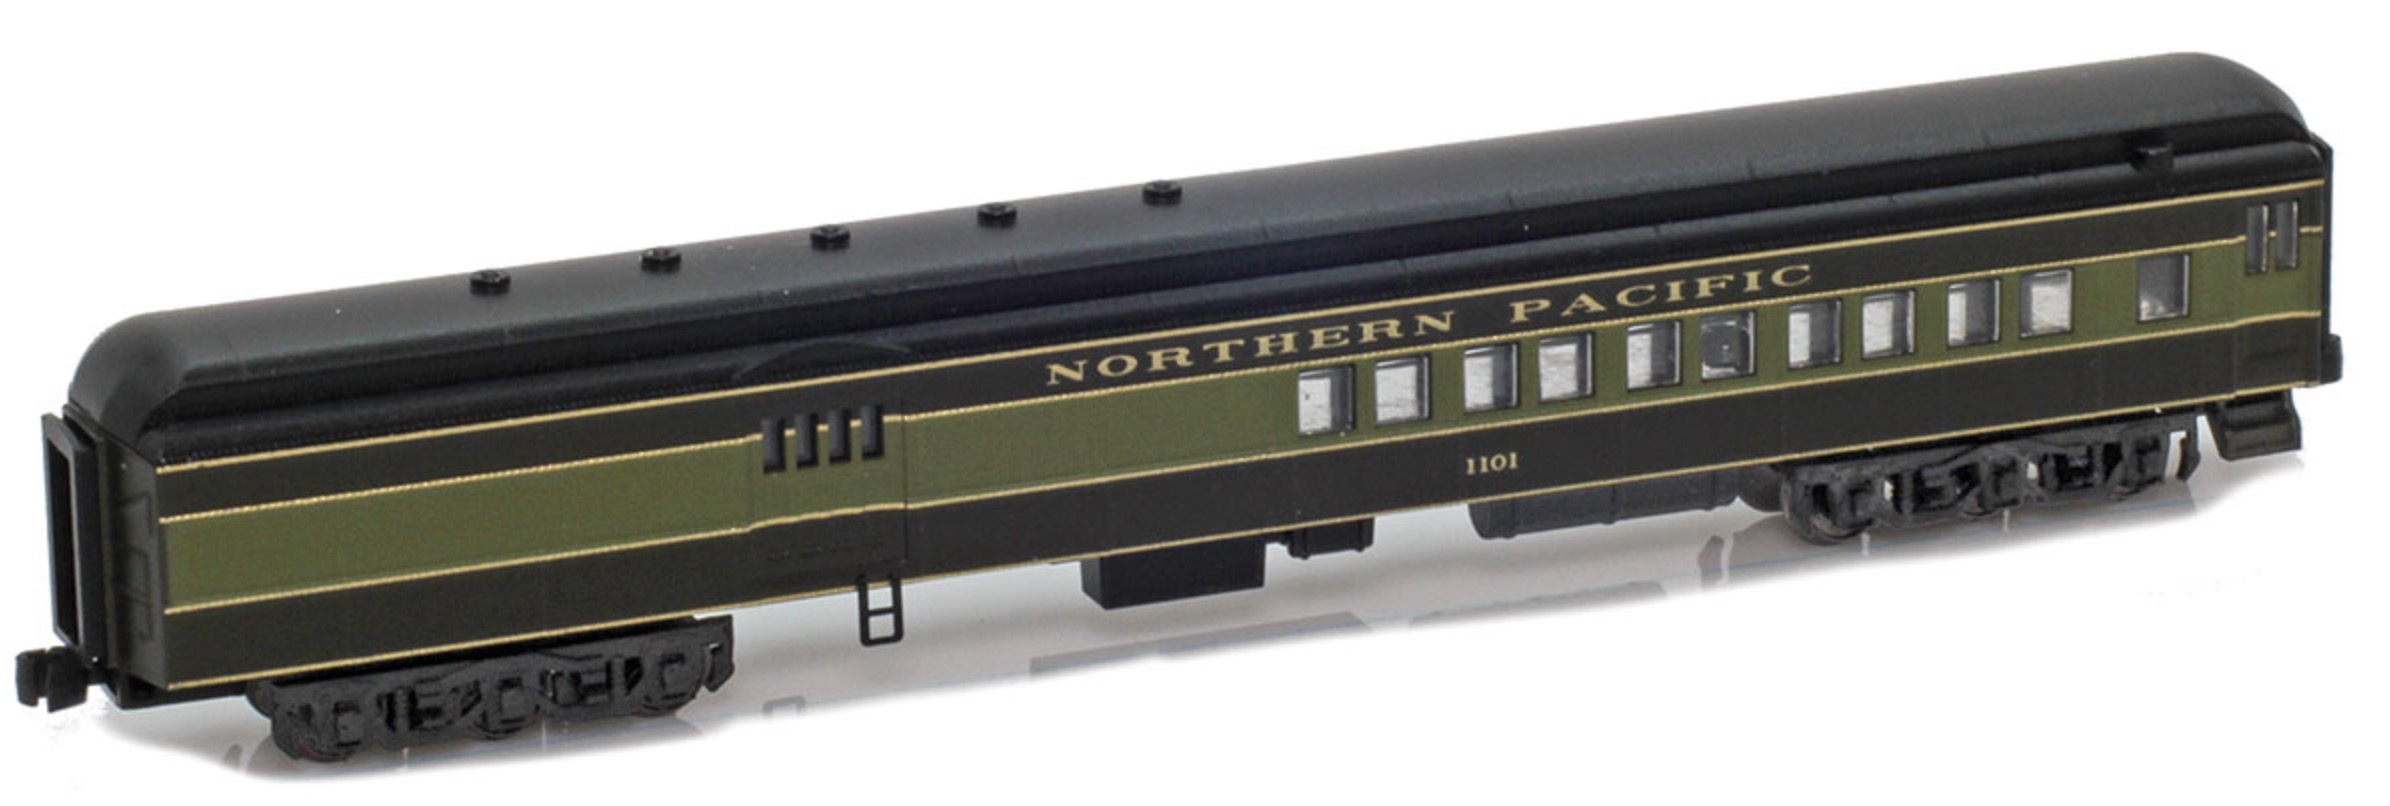 Z Scale - AZL - 74033-2 - Passenger Car, Heavyweight, Combine - Northern Pacific - 1102